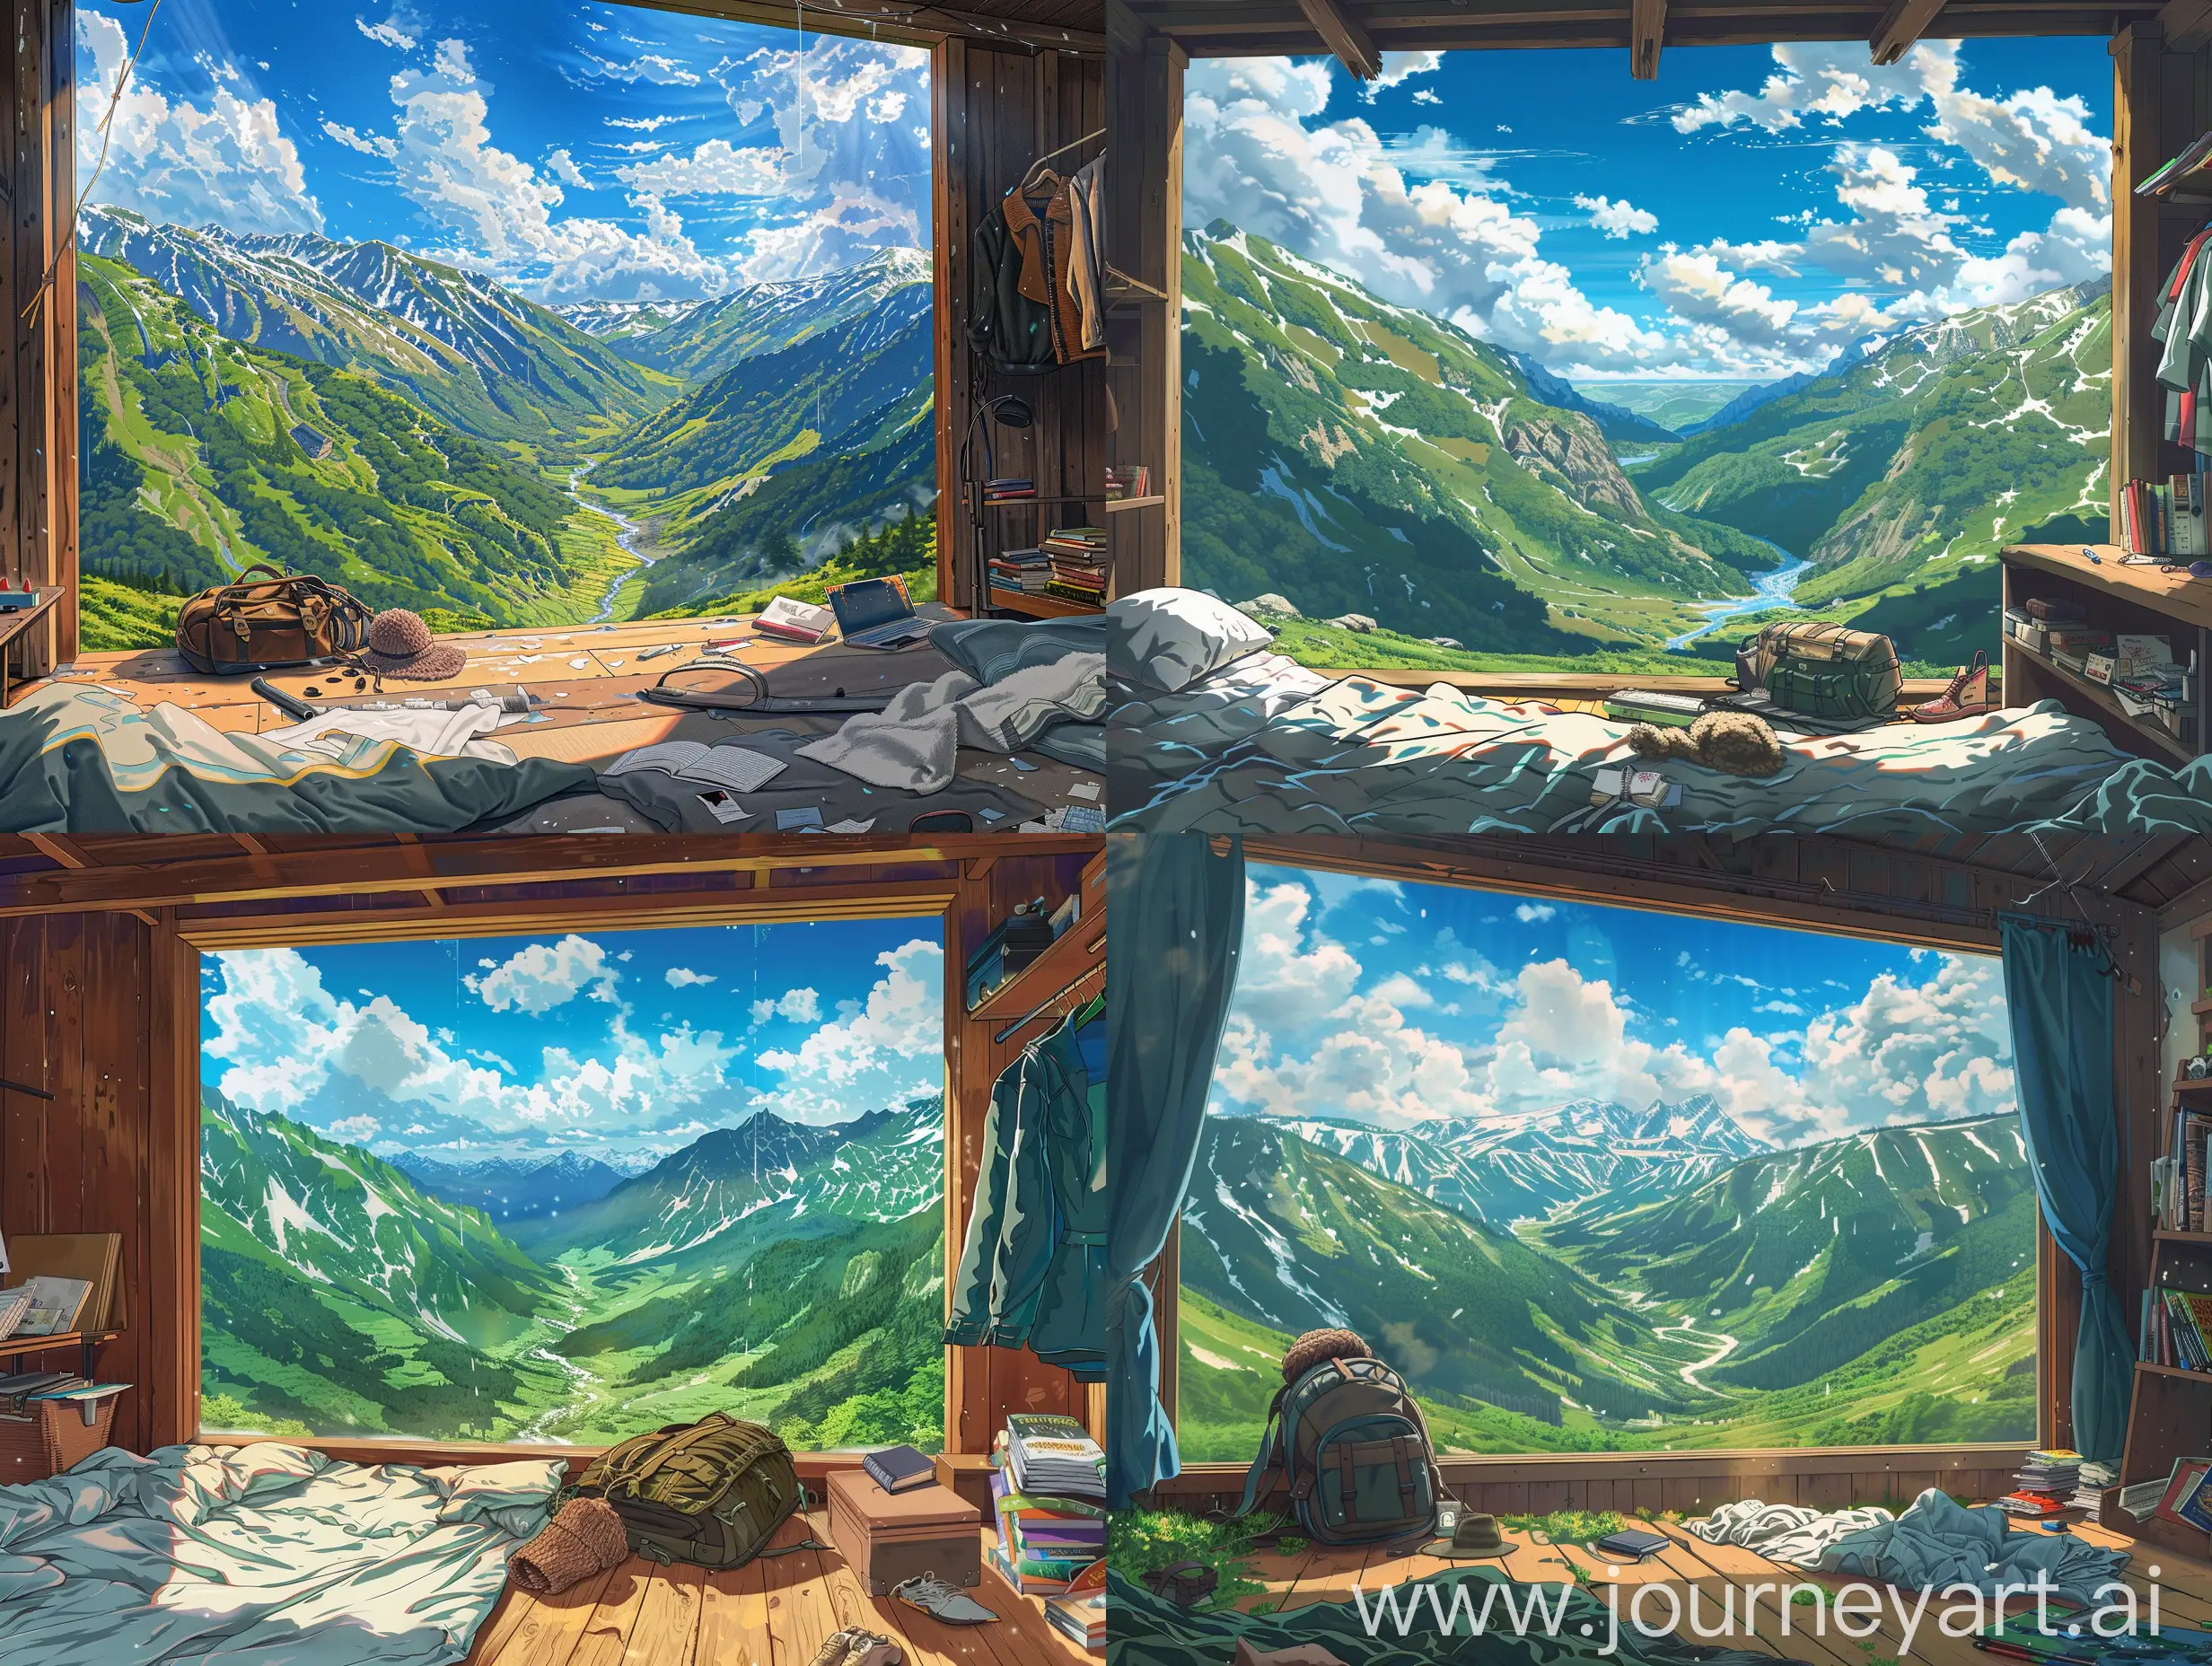 Anime style, room overlooking a valley located between green mountains.  The sky is blue and full of clouds, the top of the green mountains is filled with some snow. These snows melt into water and rush down to the valley due to the sun's rays.  The room is warm and wooden. Under the window there is a bed with scattered bedding.  Next to the bed is a large travel backpack with a wool hat for the cold.  There are some books in the office and a clothes hanger with some clothes on it.